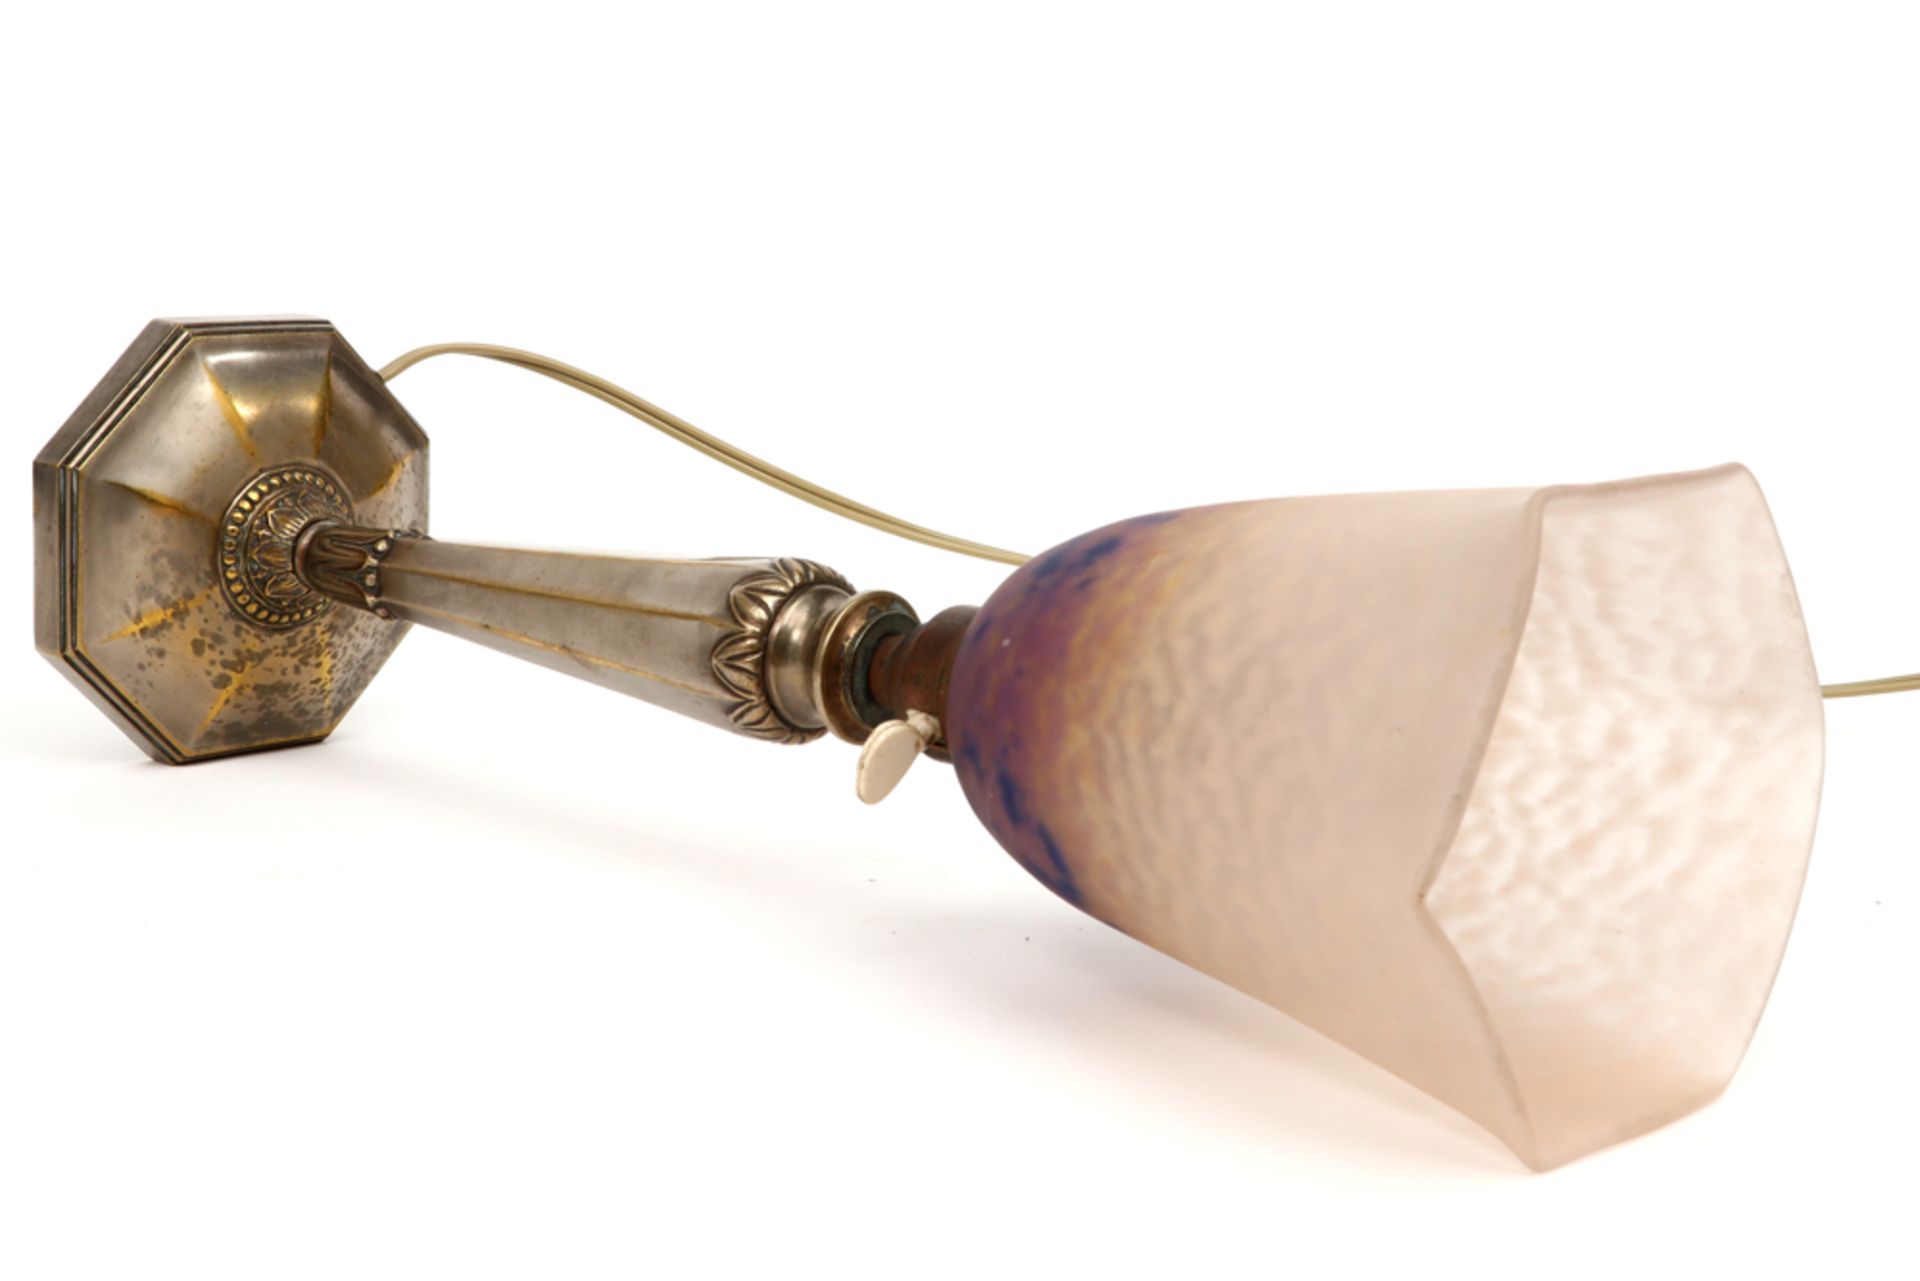 French Schneider signed Art Deco lamp with a silverplated base and a shade in pâte de verre || - Image 3 of 4